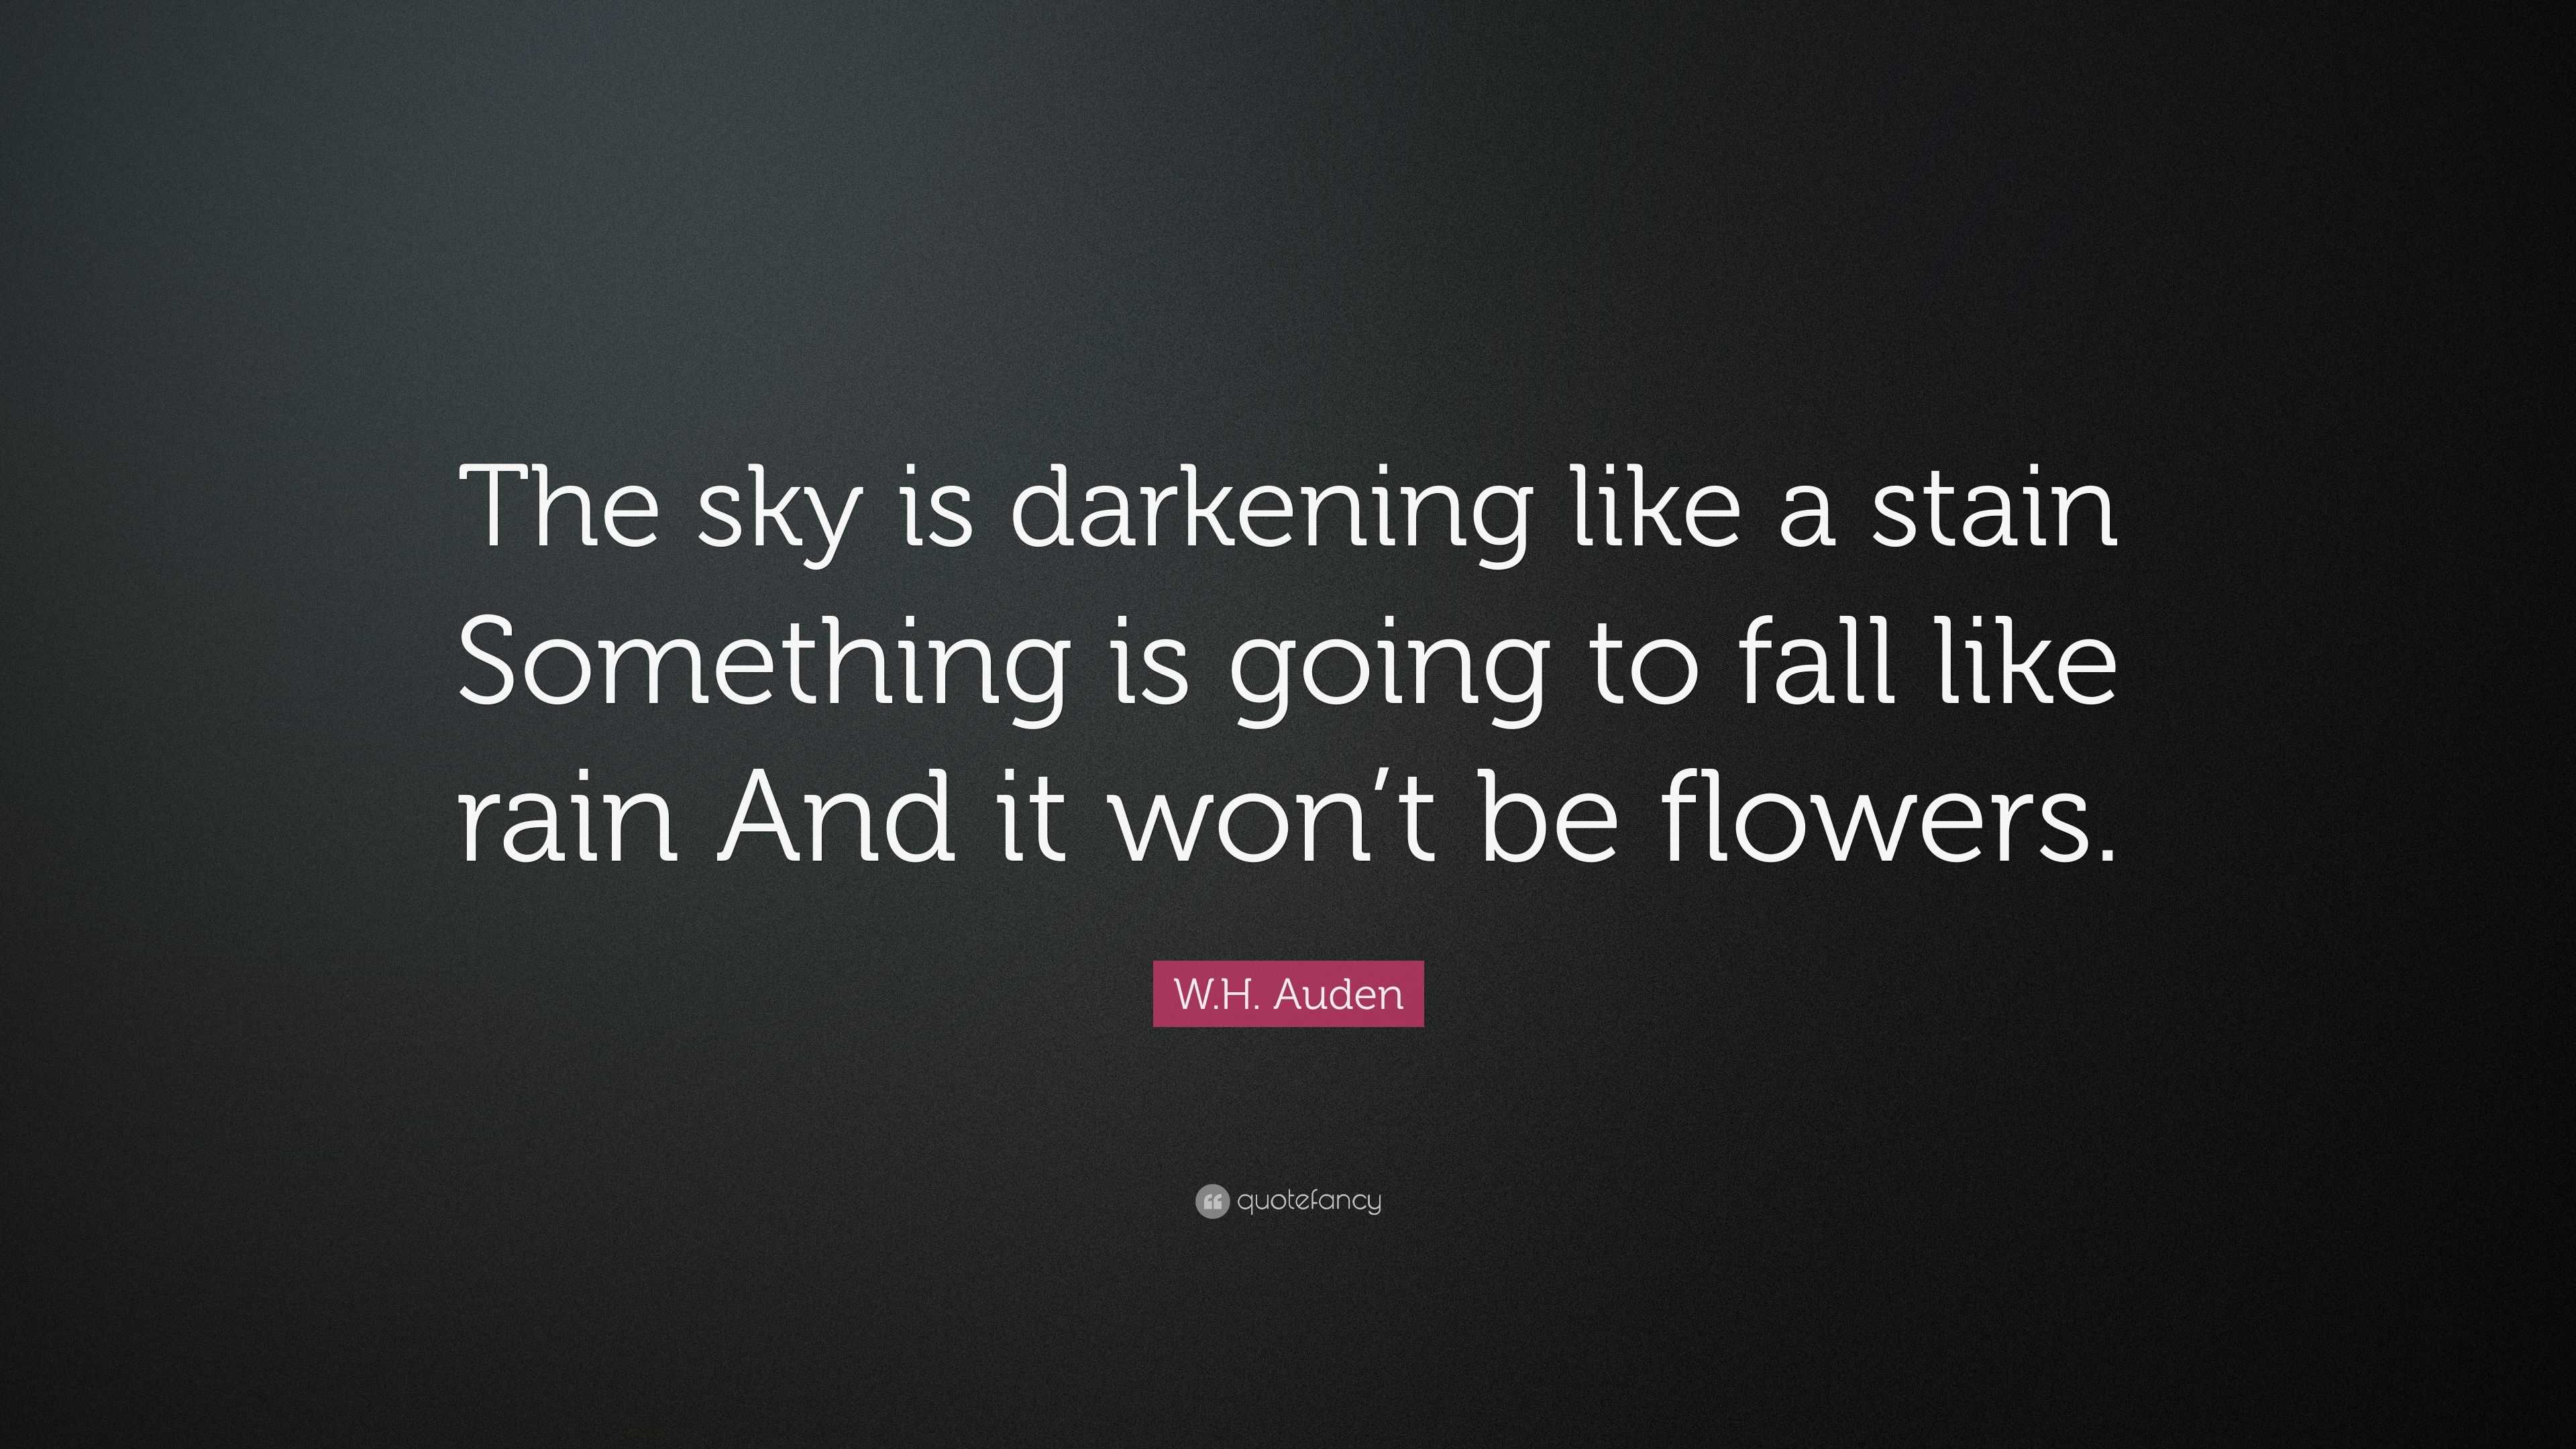 W.H. Auden Quote: “The sky is darkening like a stain Something is going to  fall like